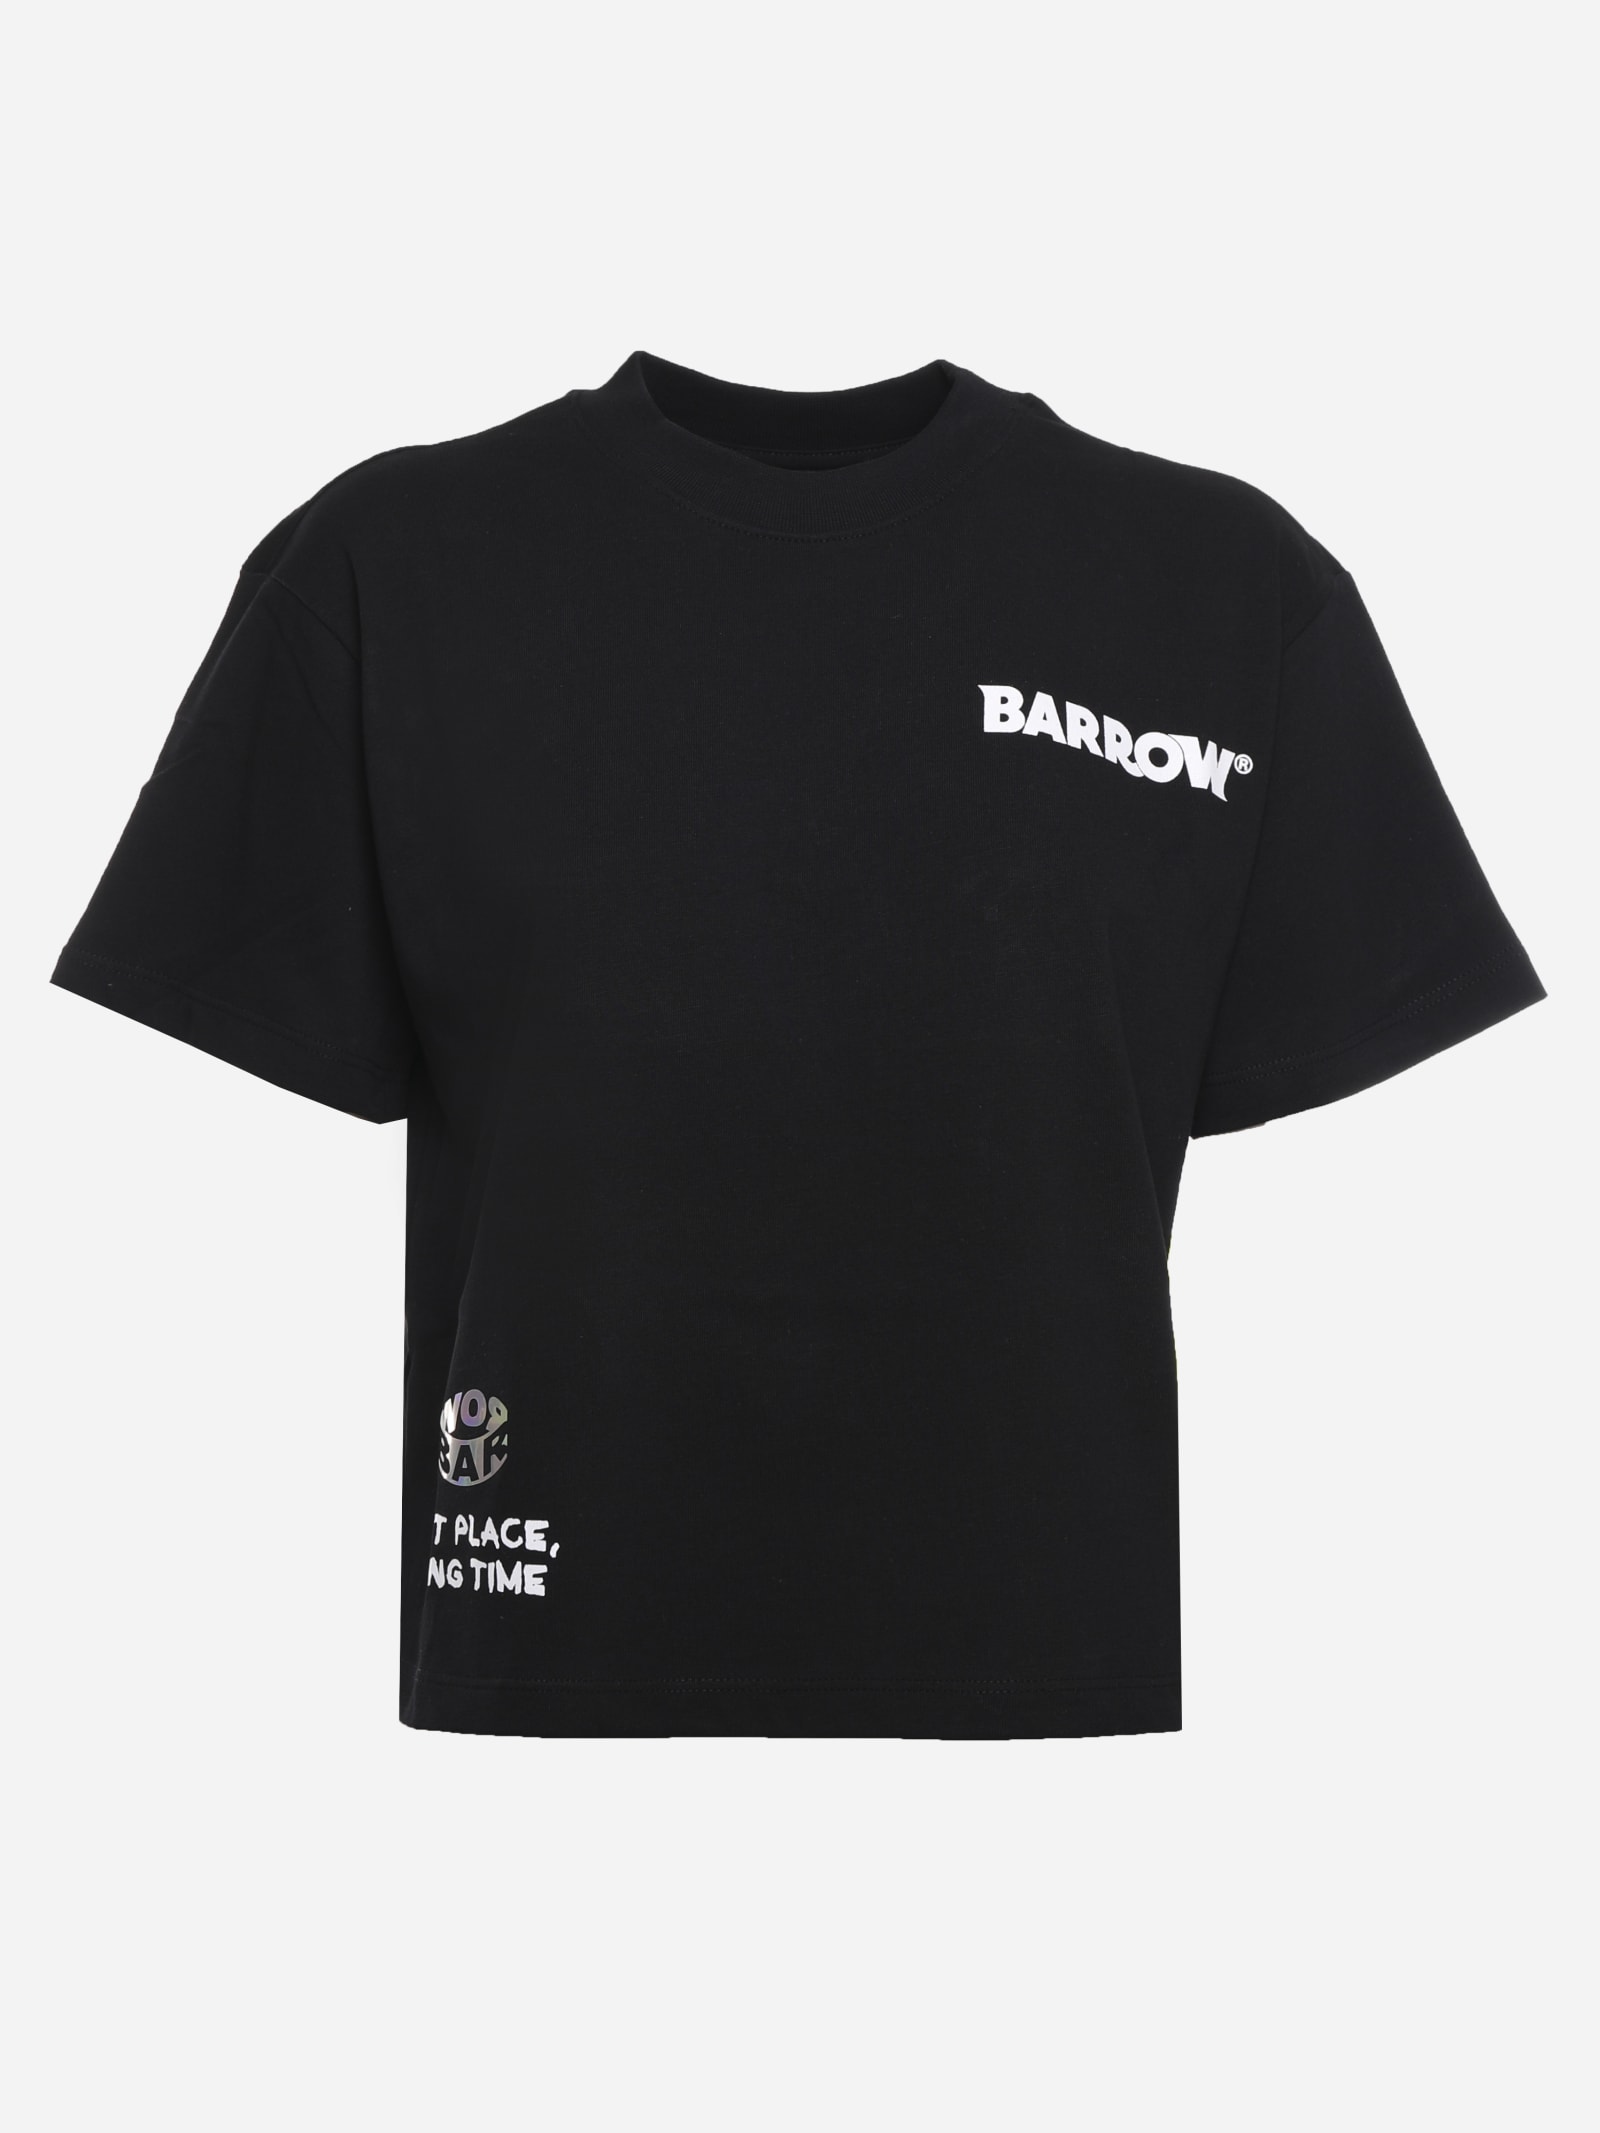 BARROW COTTON T-SHIRT WITH MAXI REAR LOGO PRINT WITH CRYSTALS,029451 -110